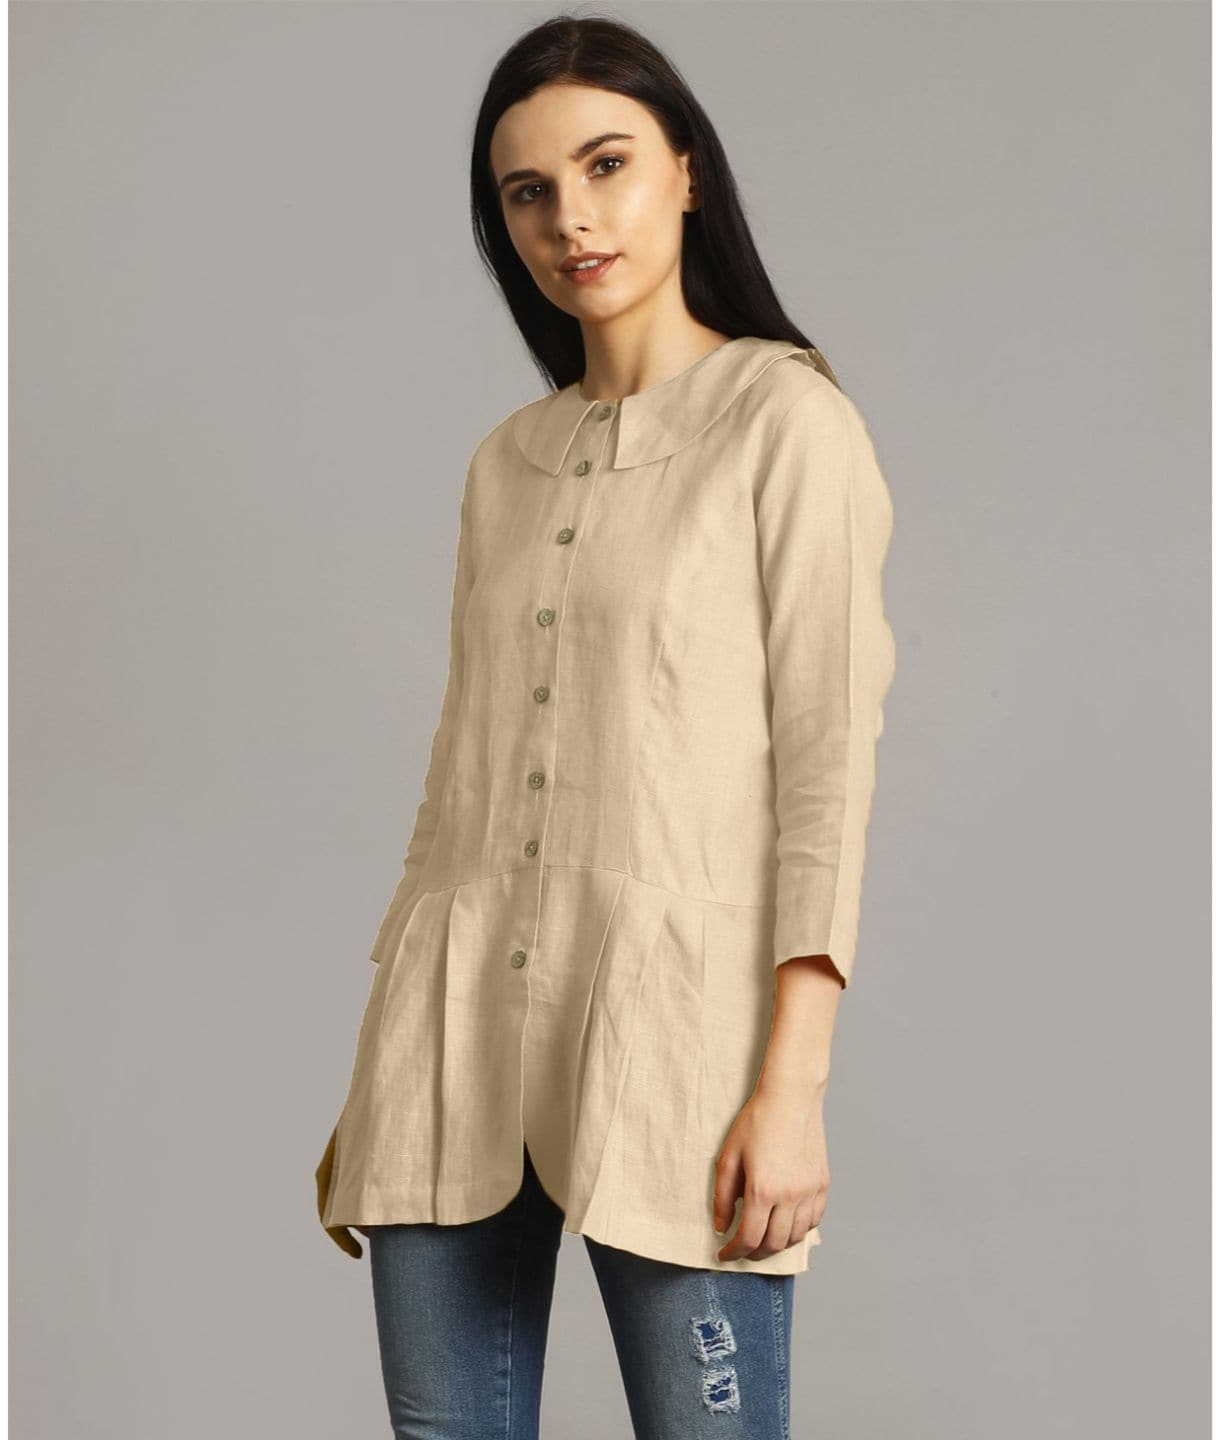 Plus Off White Peter Pan Neck Linen Tunic - Uptownie